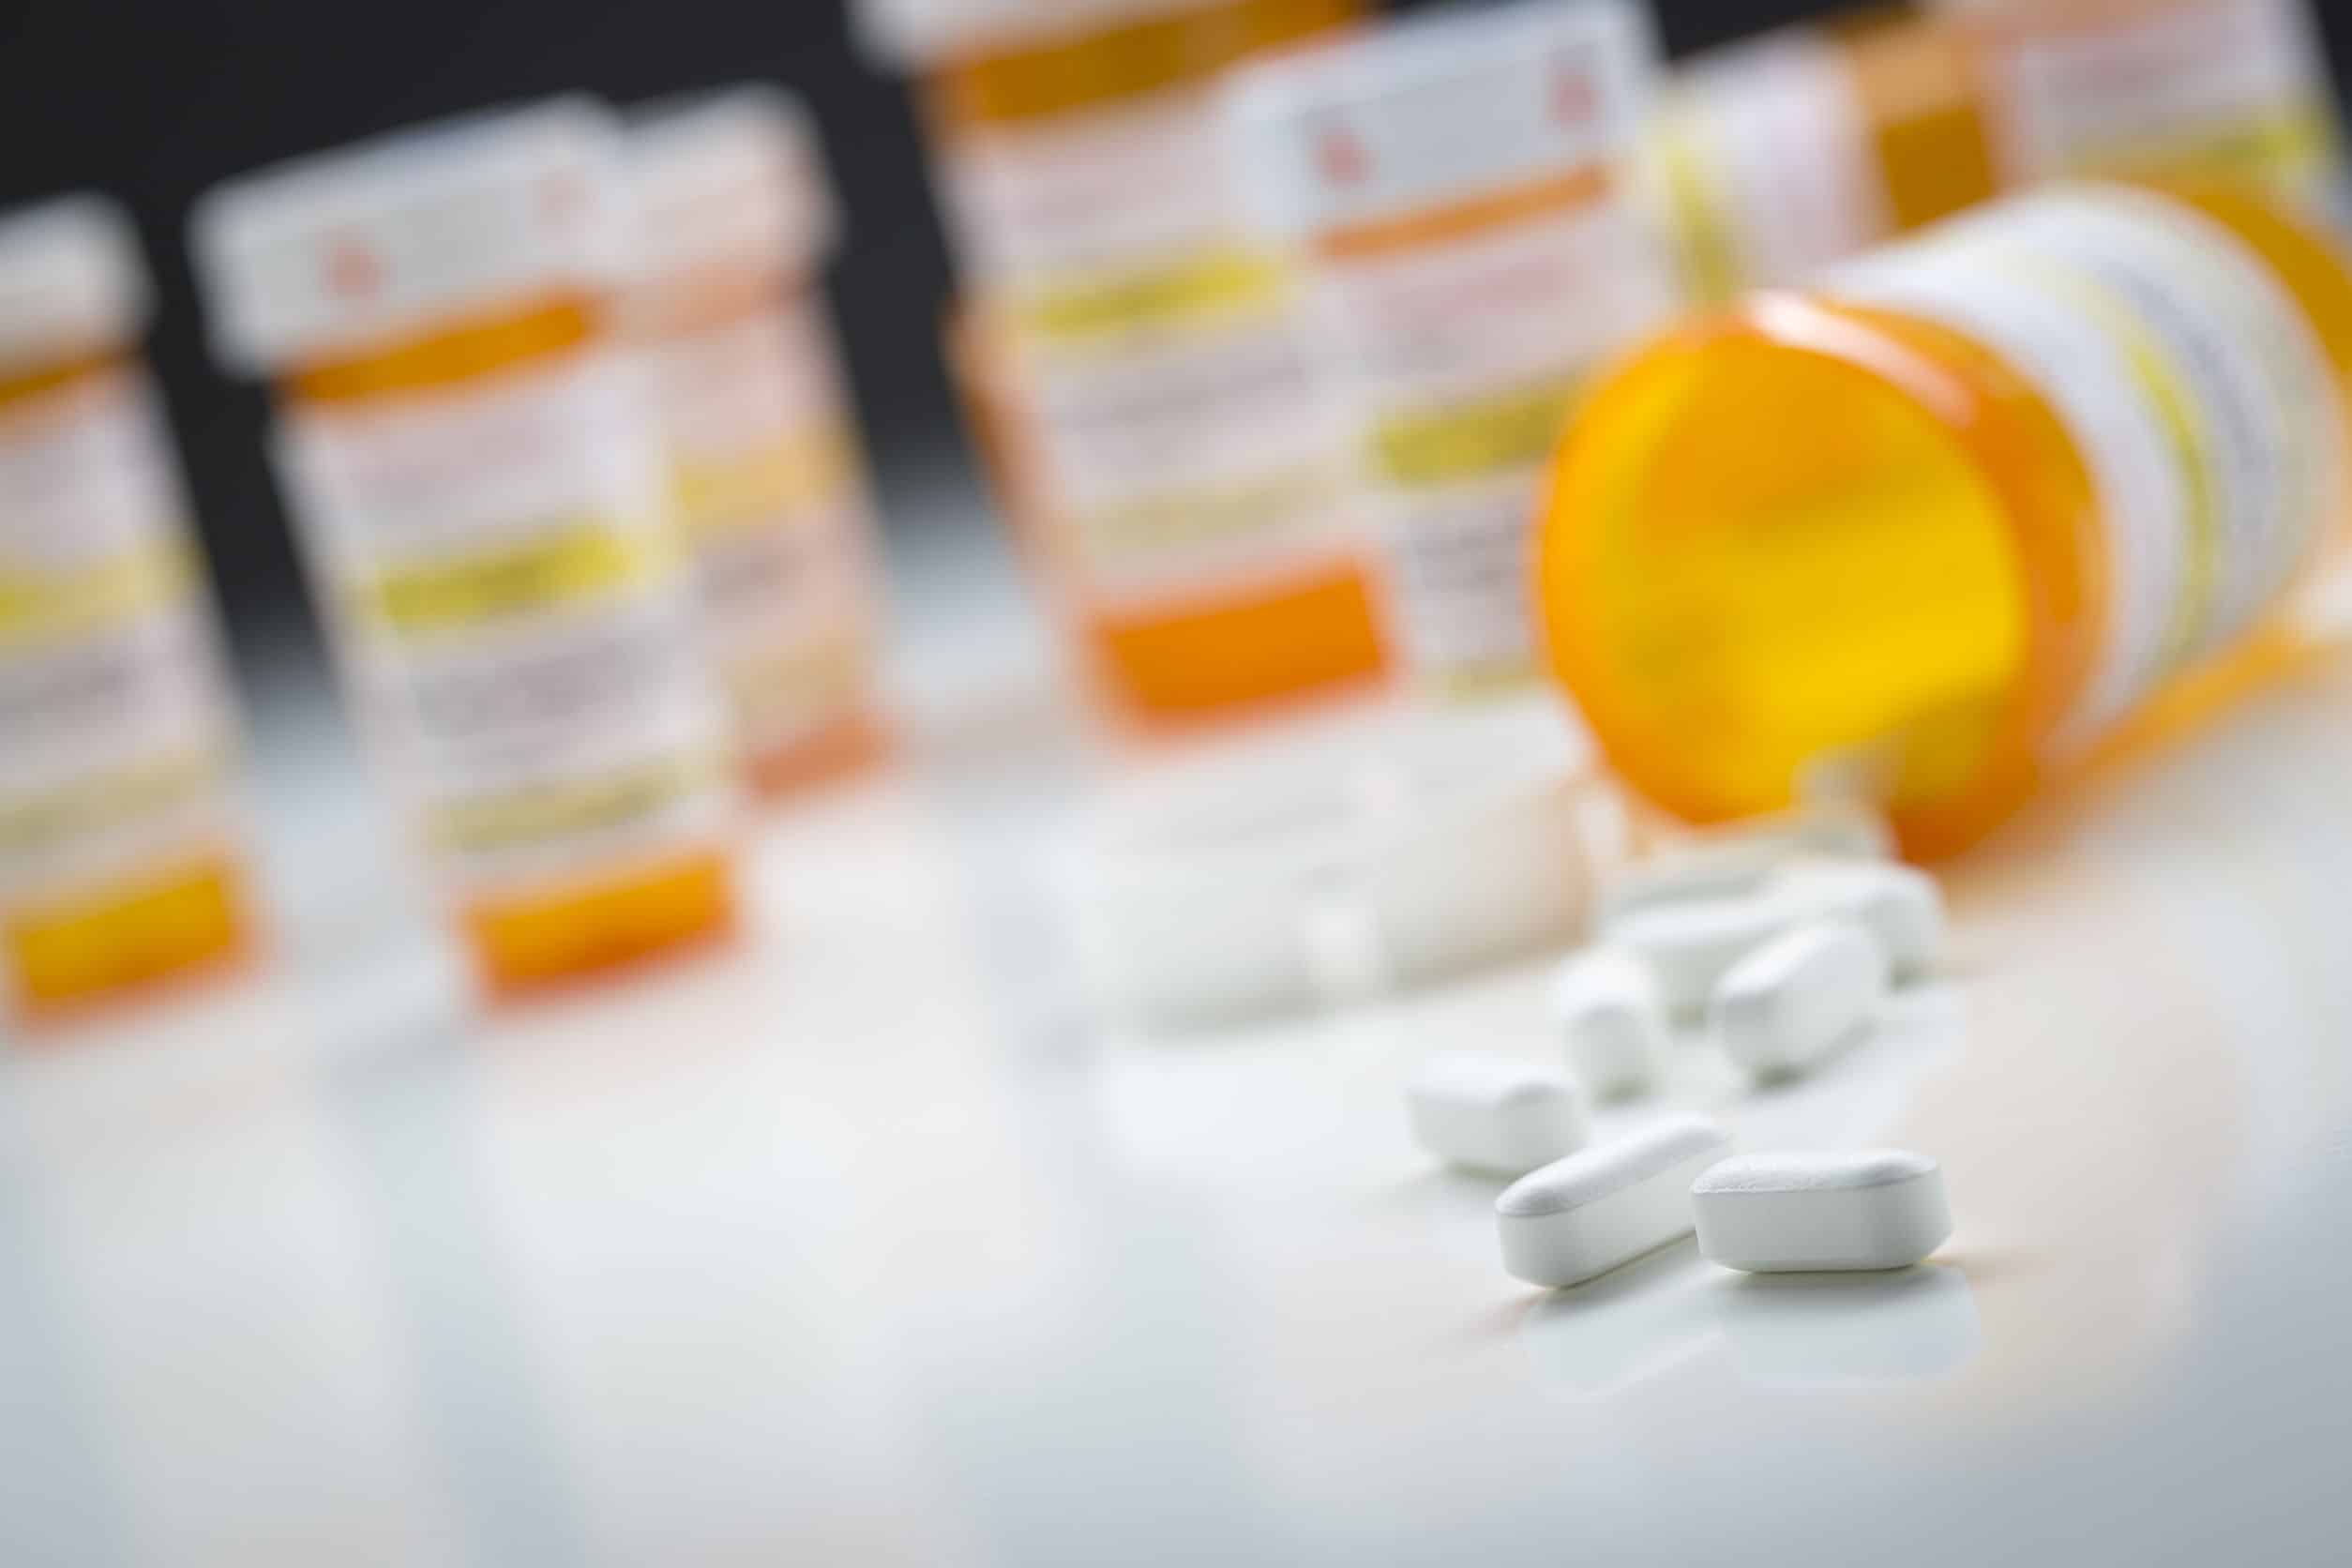 Colorado Criminal Charges Related to Prescription Drugs